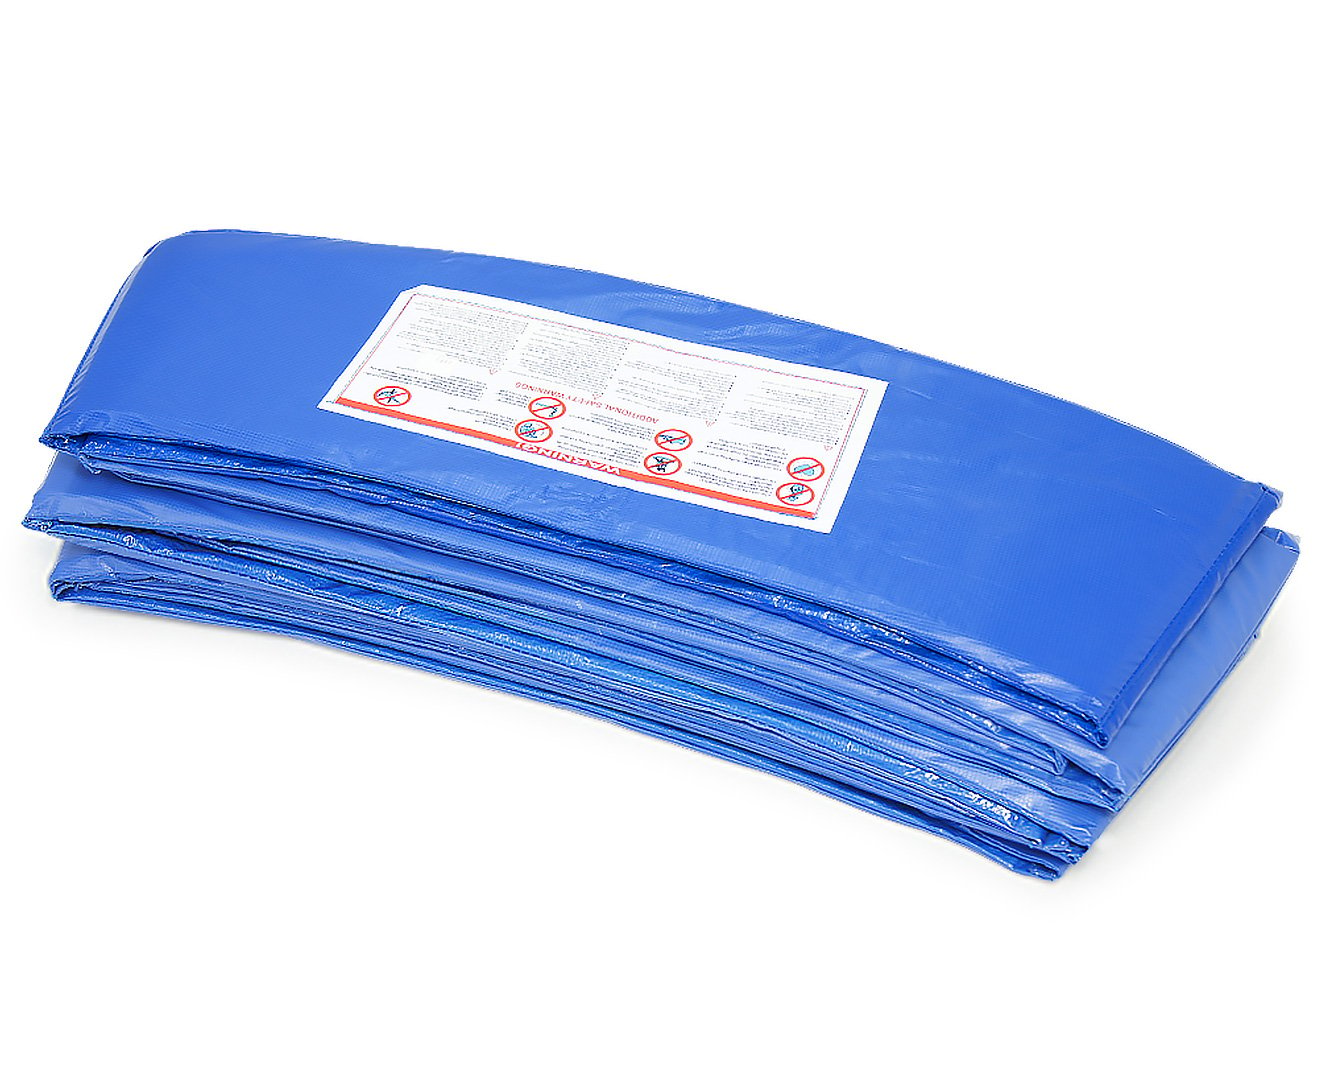 10ft Trampoline Replacement Safety Pad and Net Round 8 Poles Blue 2